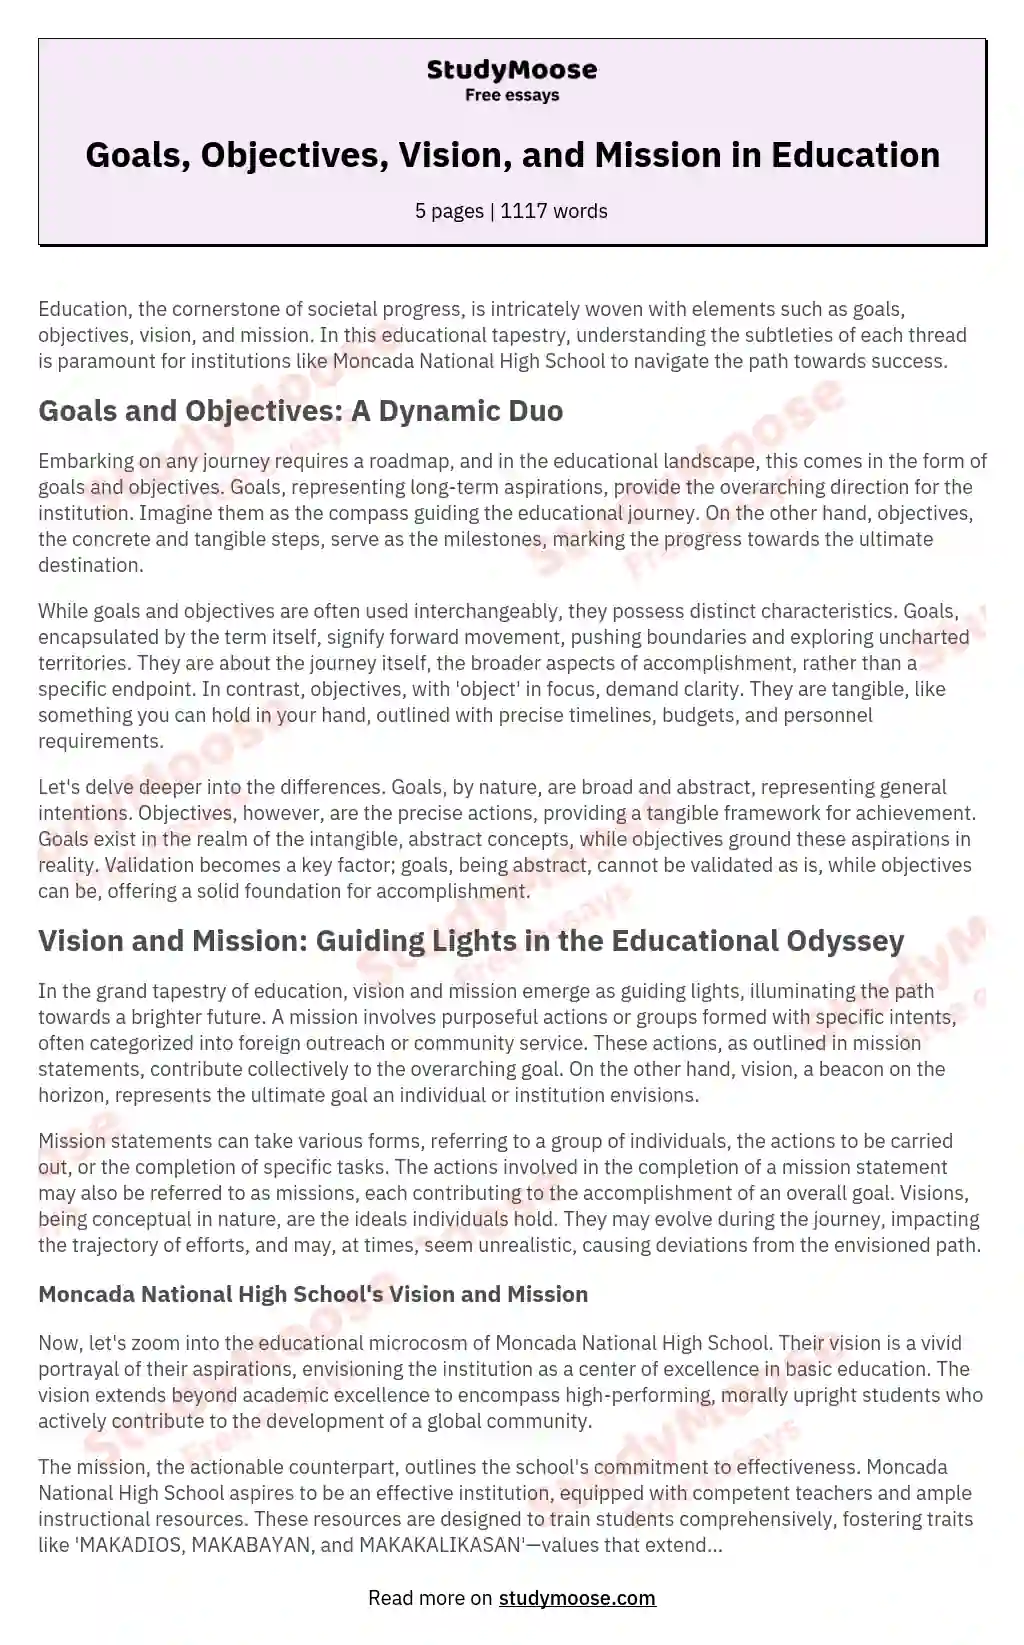 Goals, Objectives, Vision, and Mission in Education essay